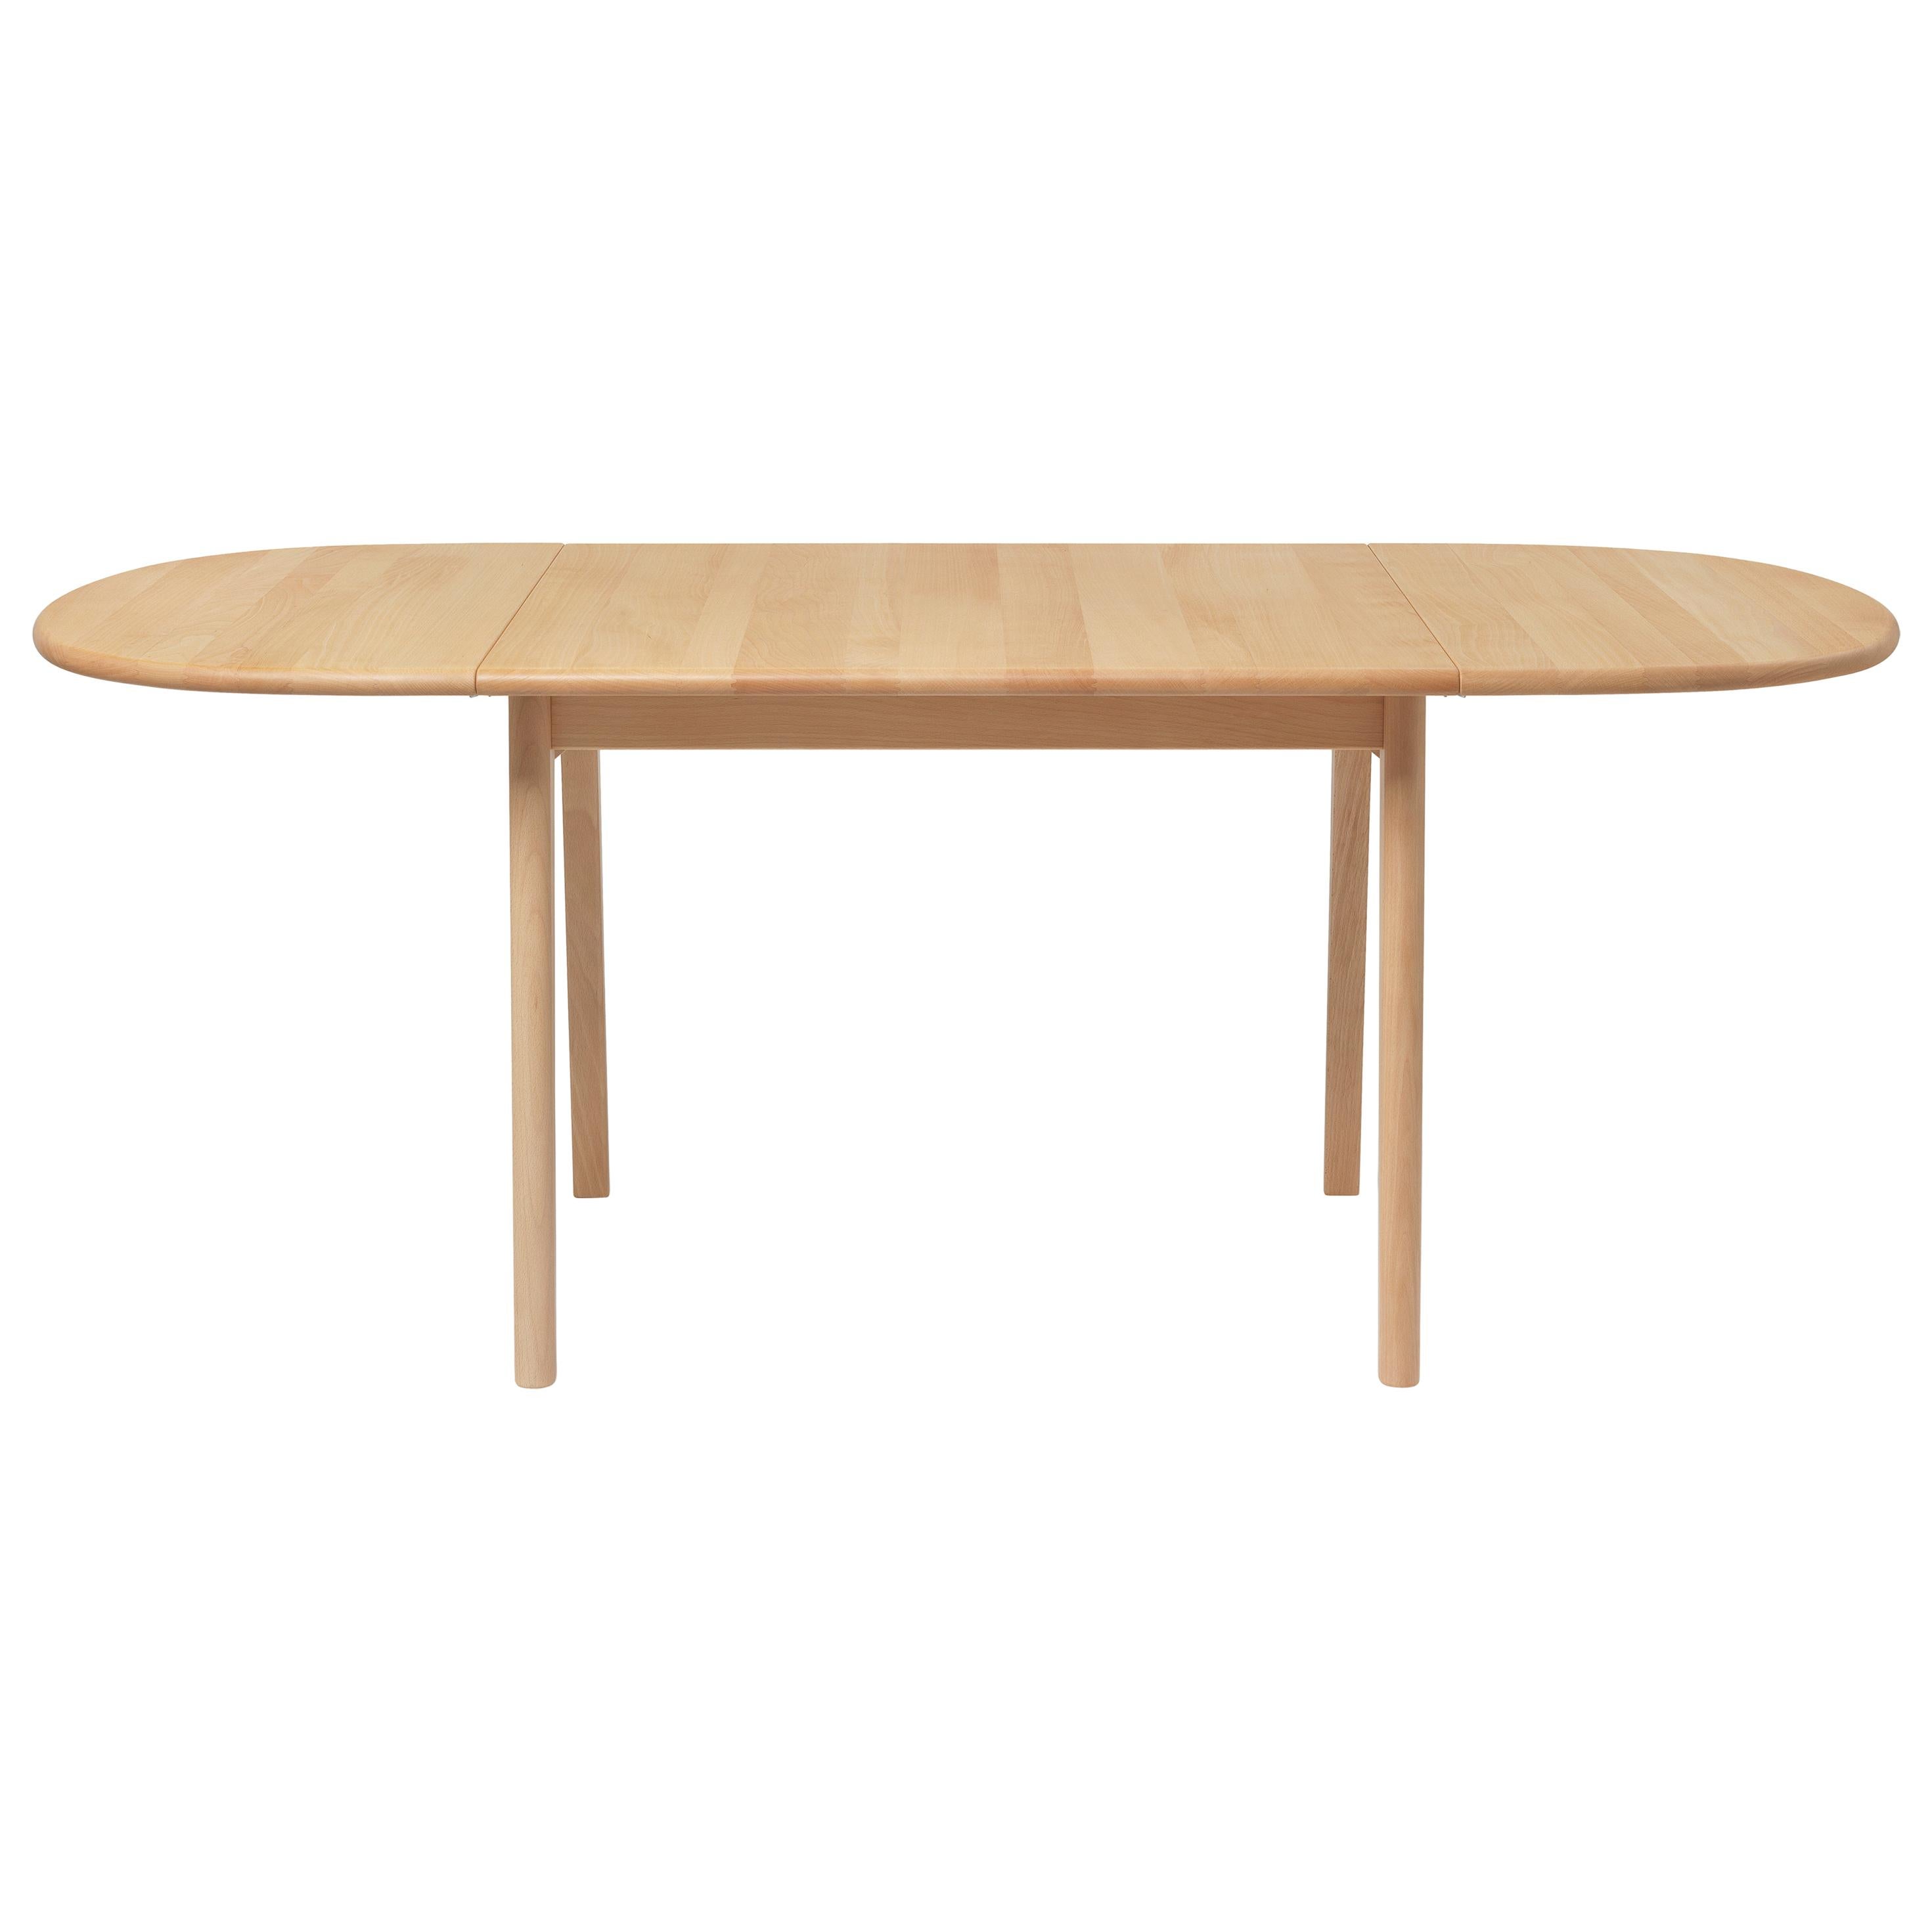 CH002 Small Dining Table in Wood Finish by Hans J. Wegner